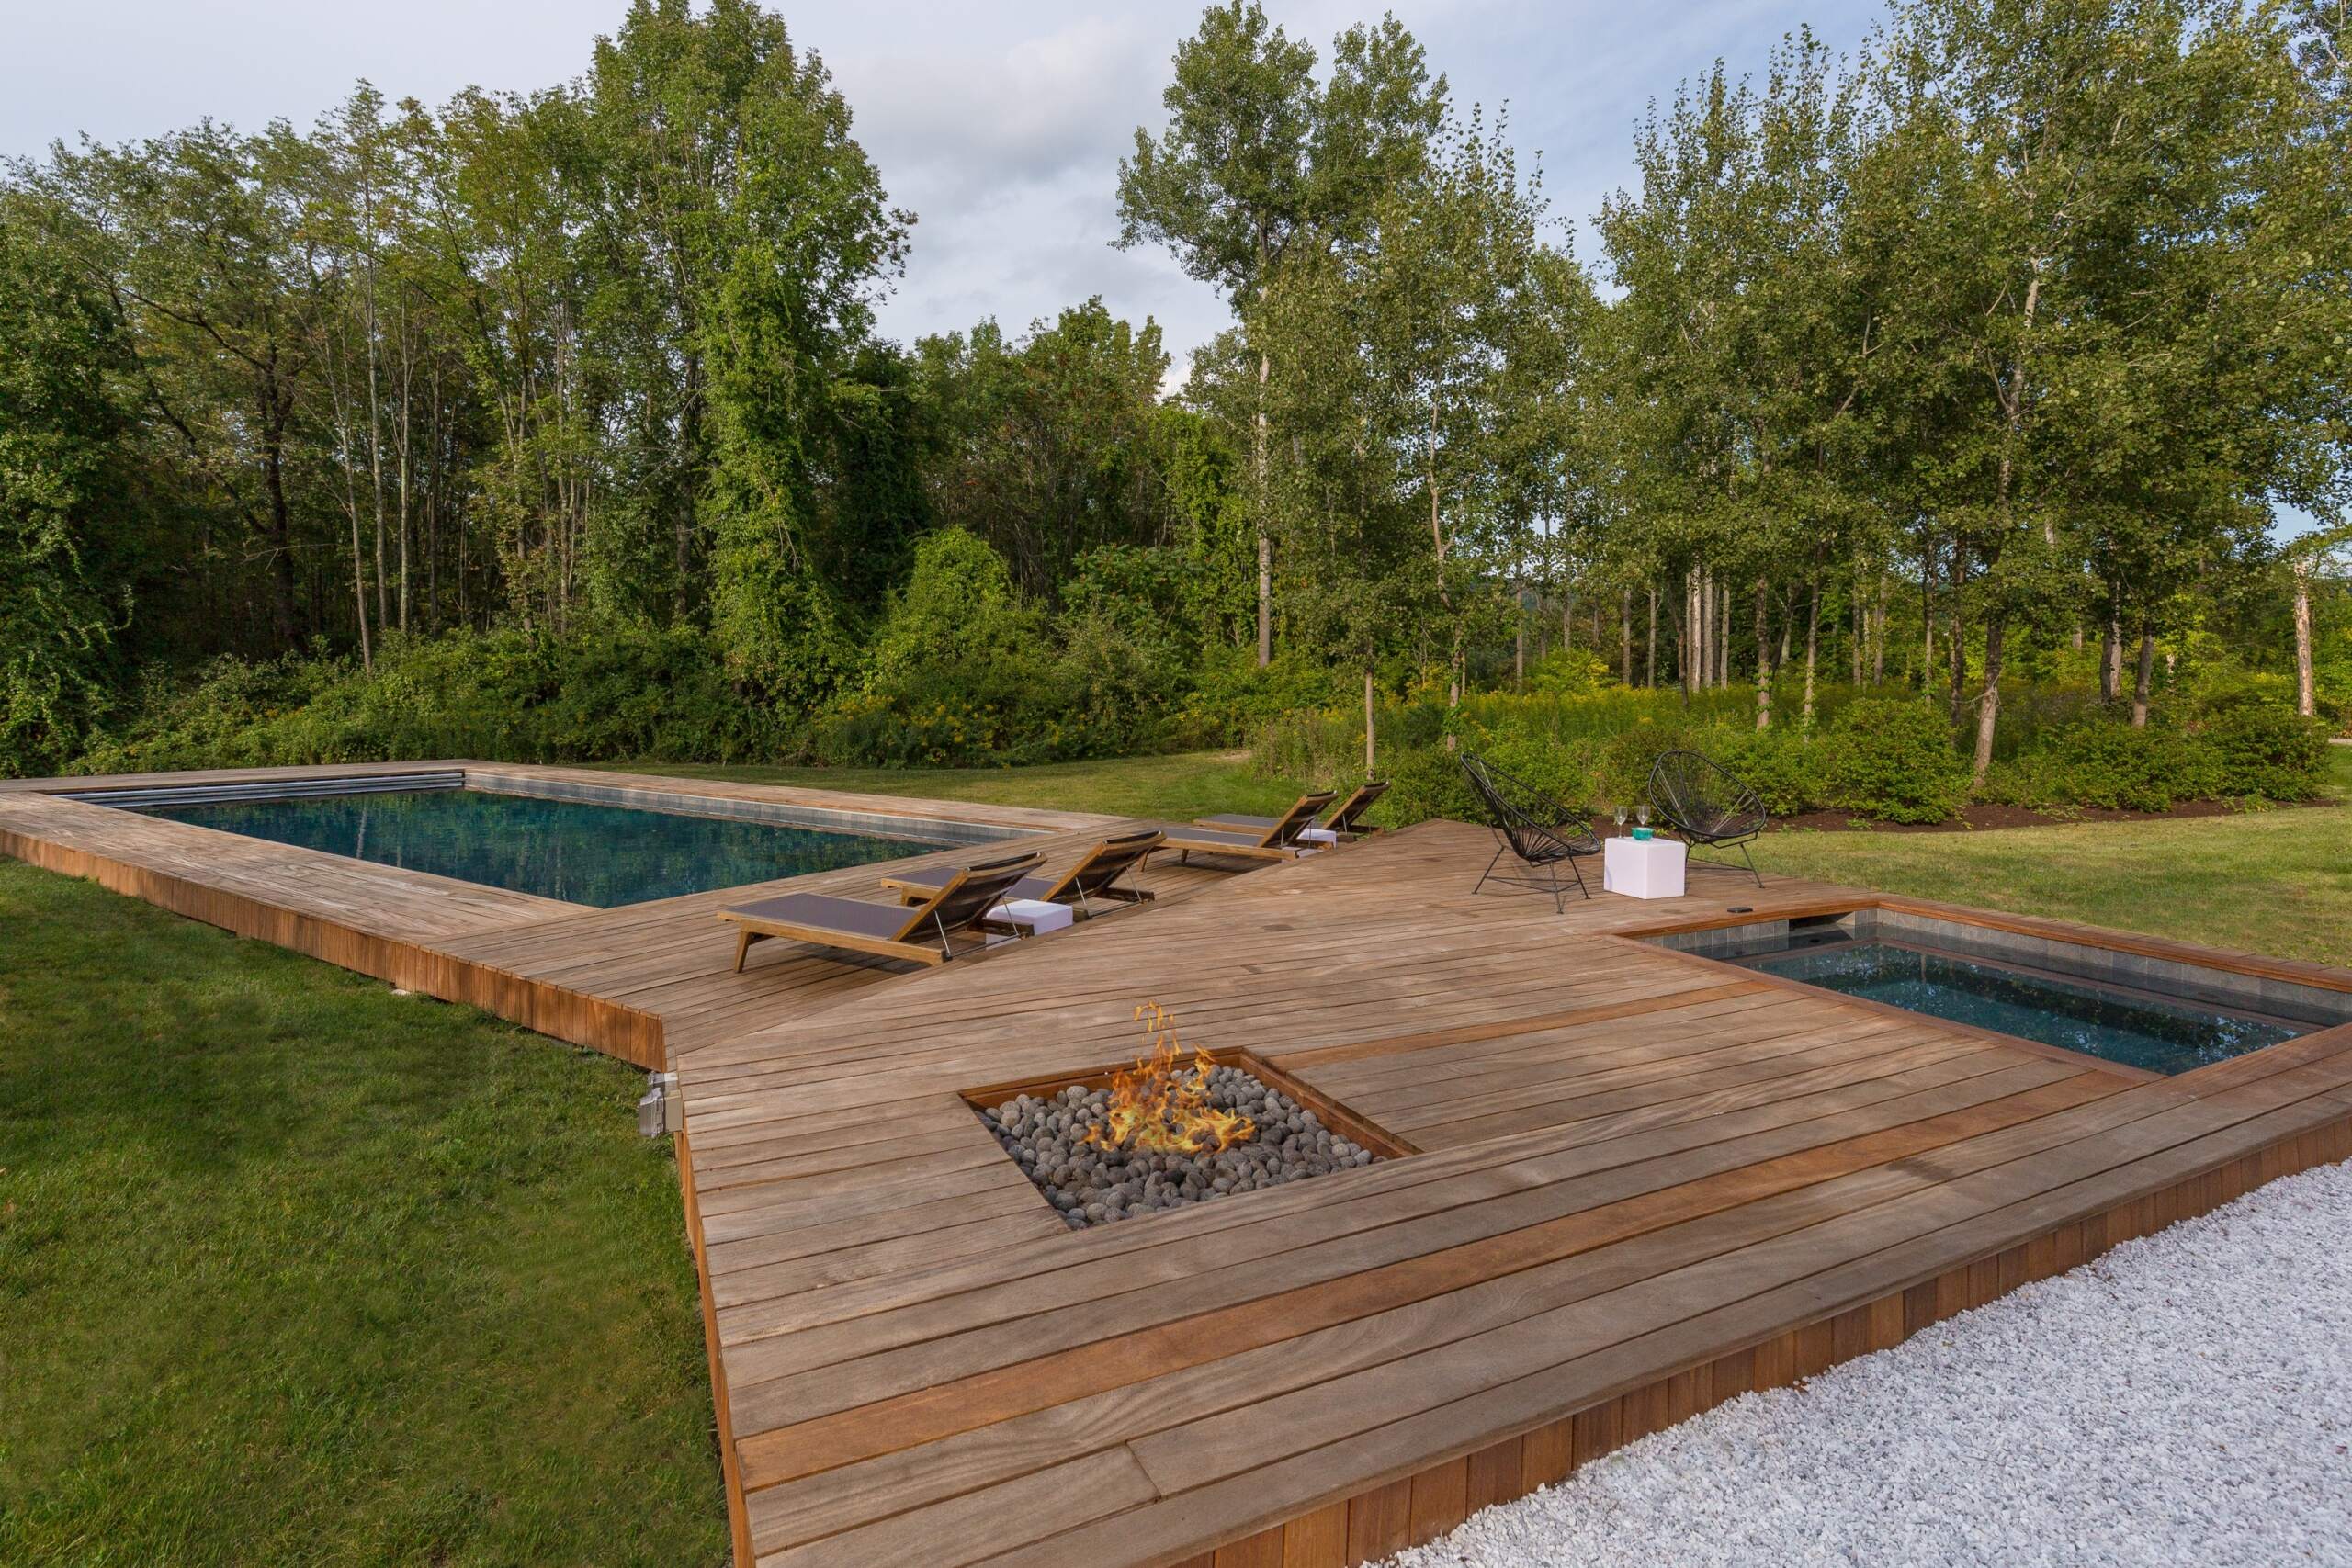 fire pit on wooden deck